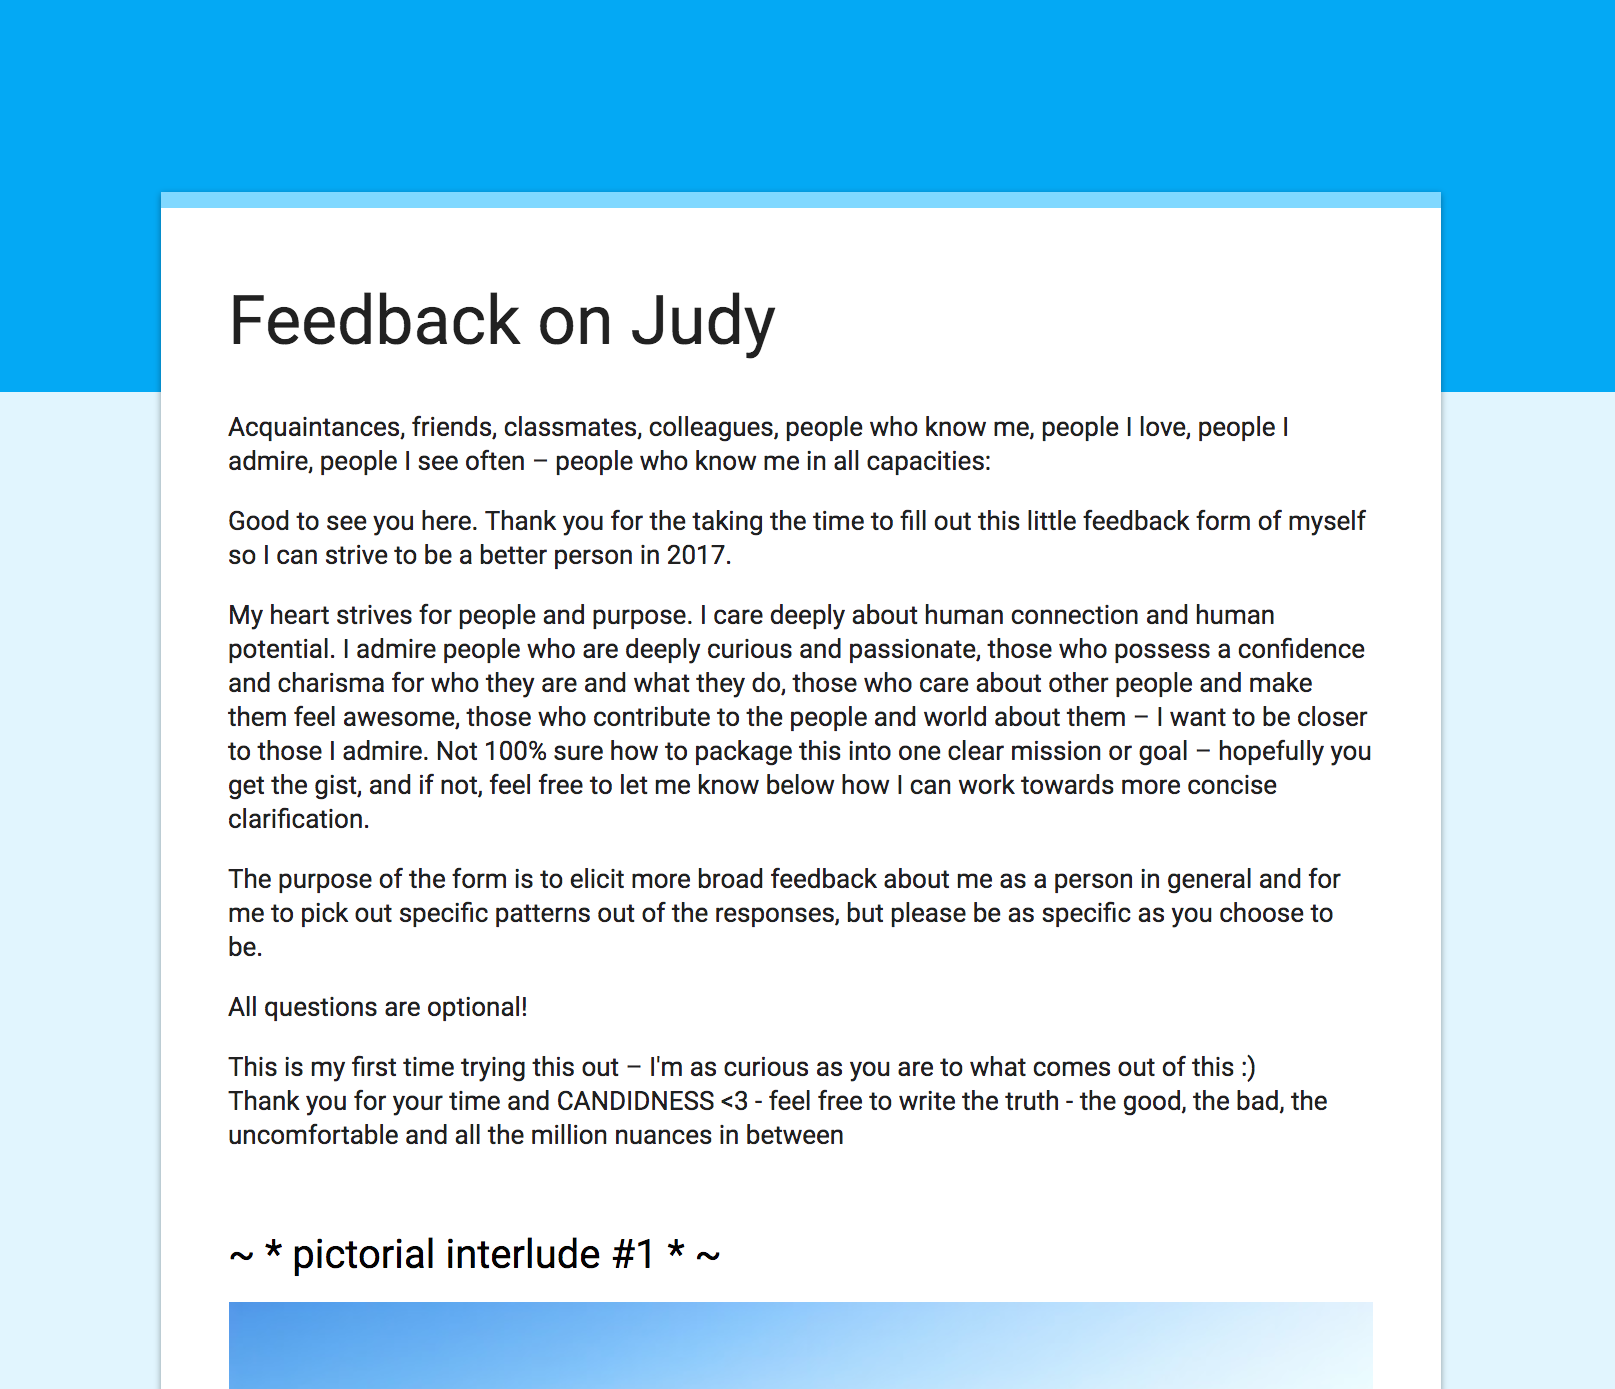 Reflections on My Self-Feedback Form  by Judy Chen  Ascent